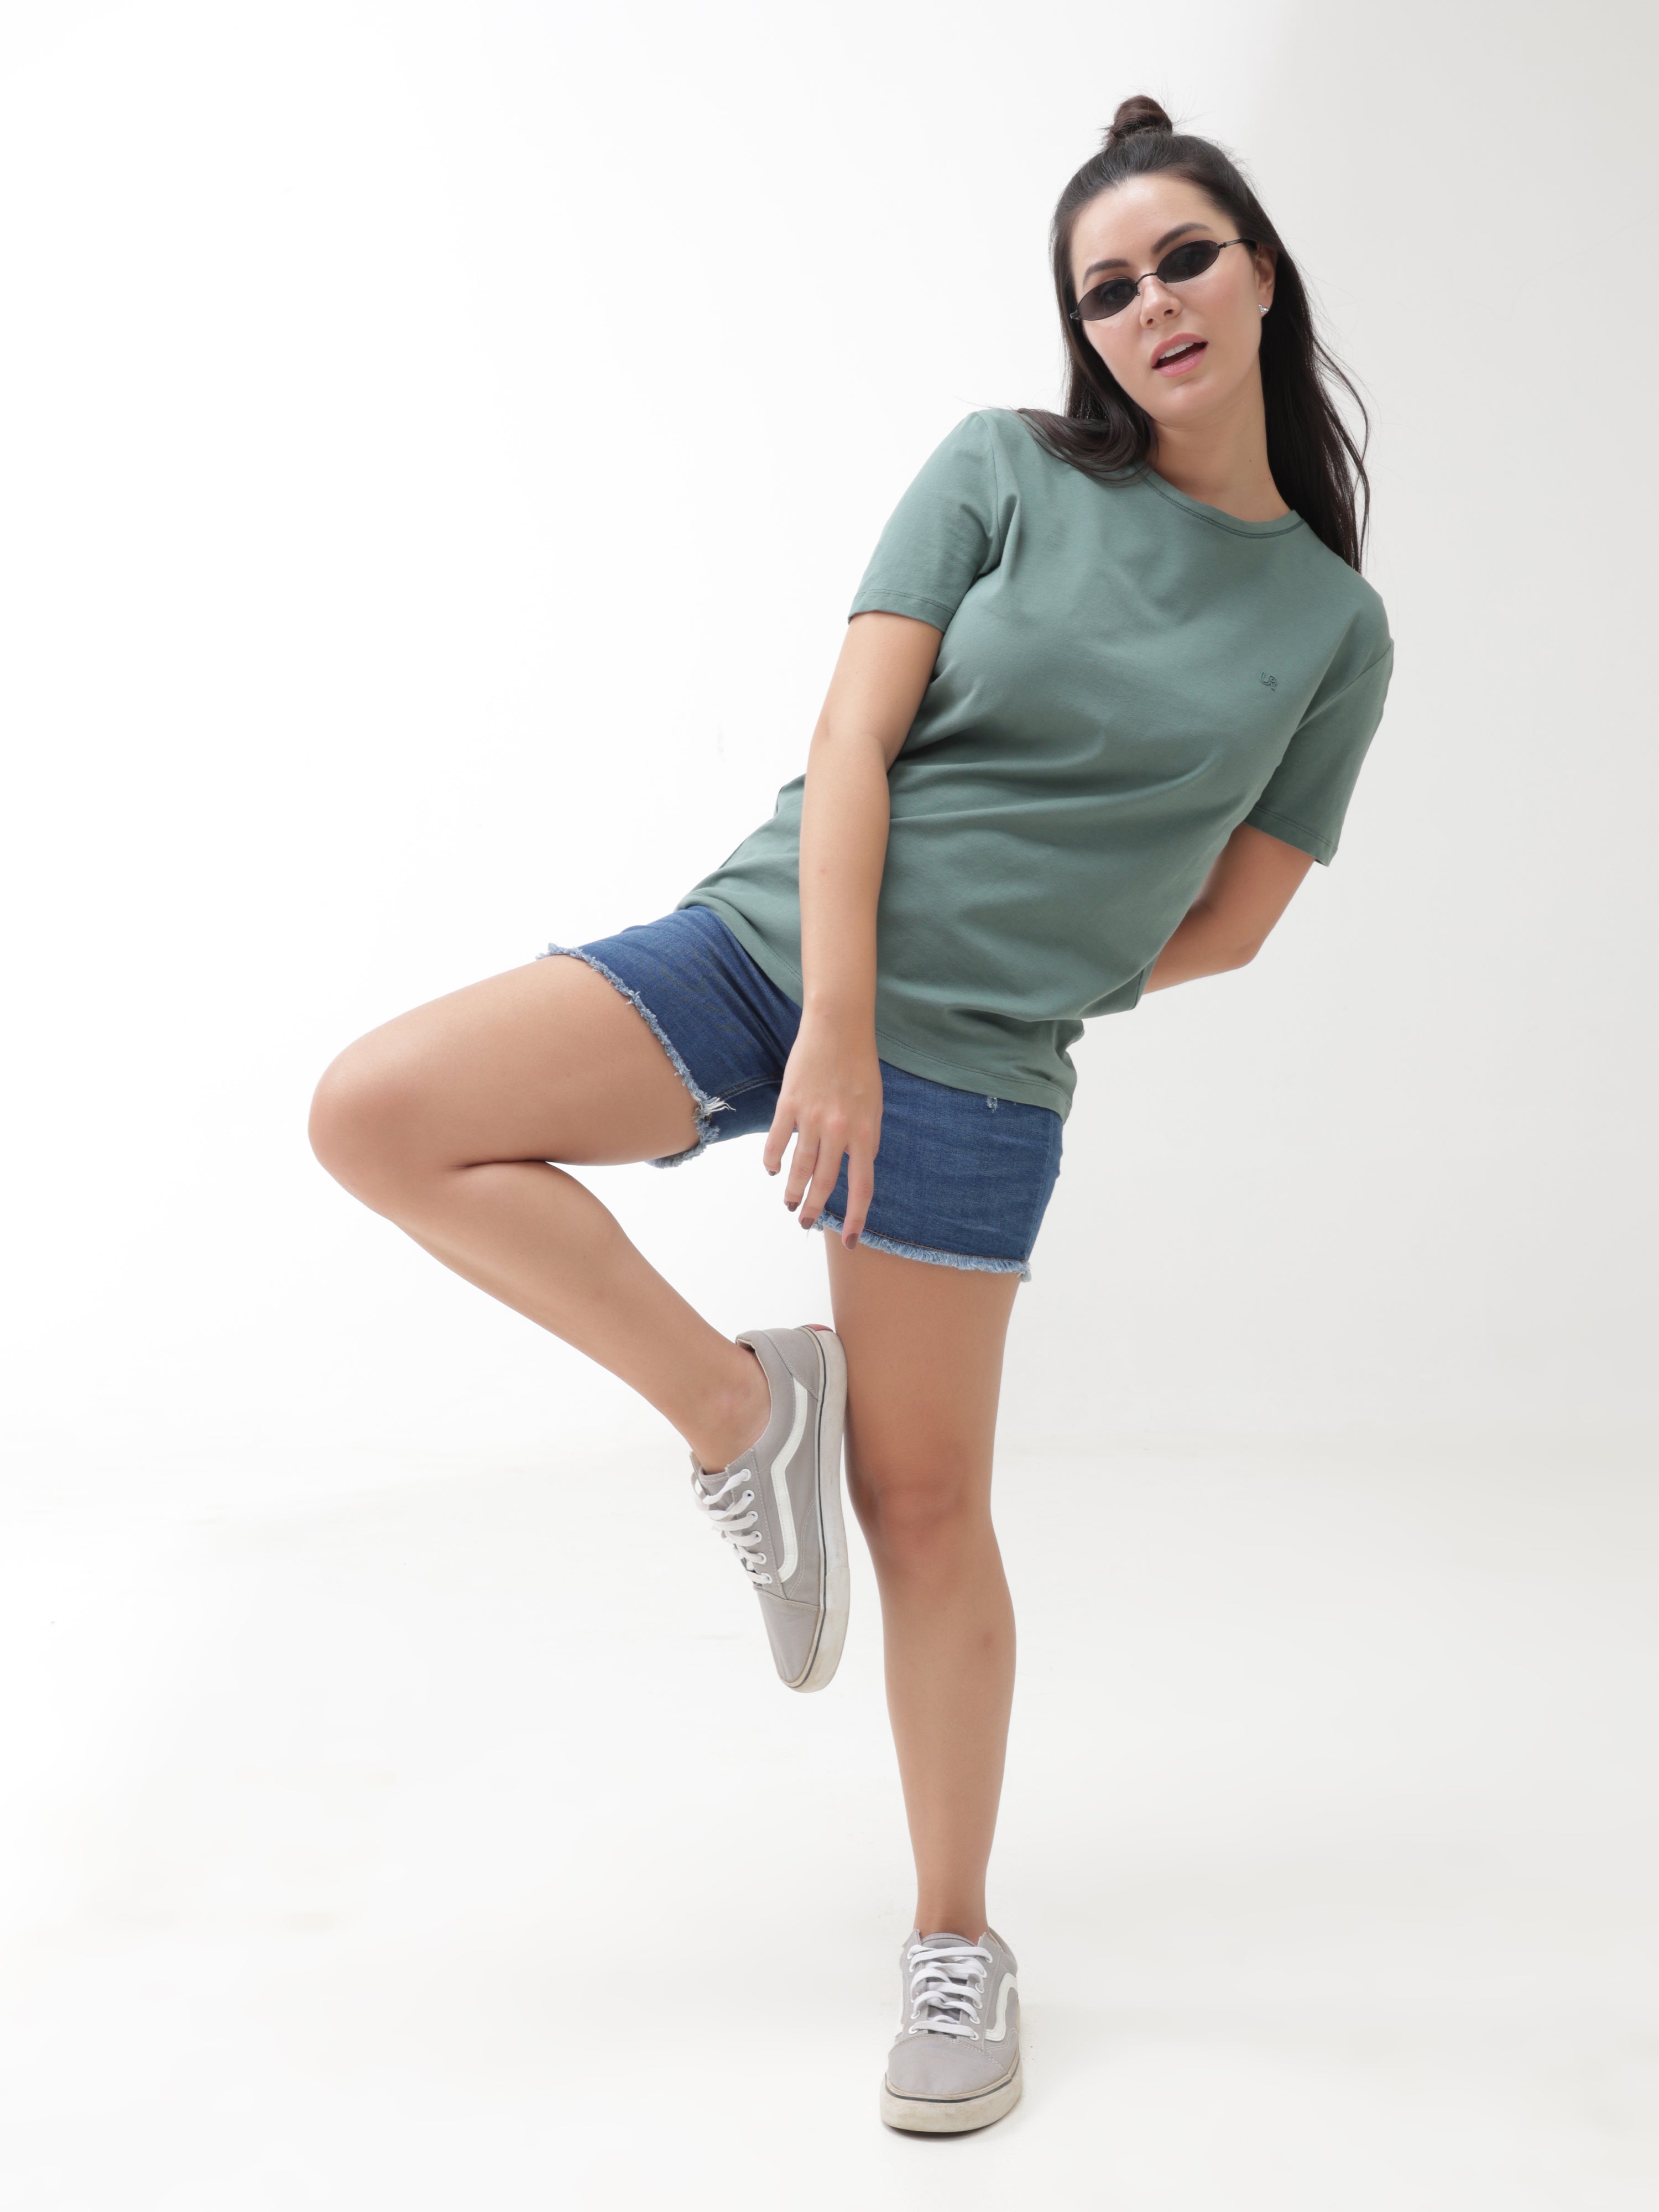 Woman in green Simple Green round-neck t-shirt and denim shorts posing stylishly against a white background